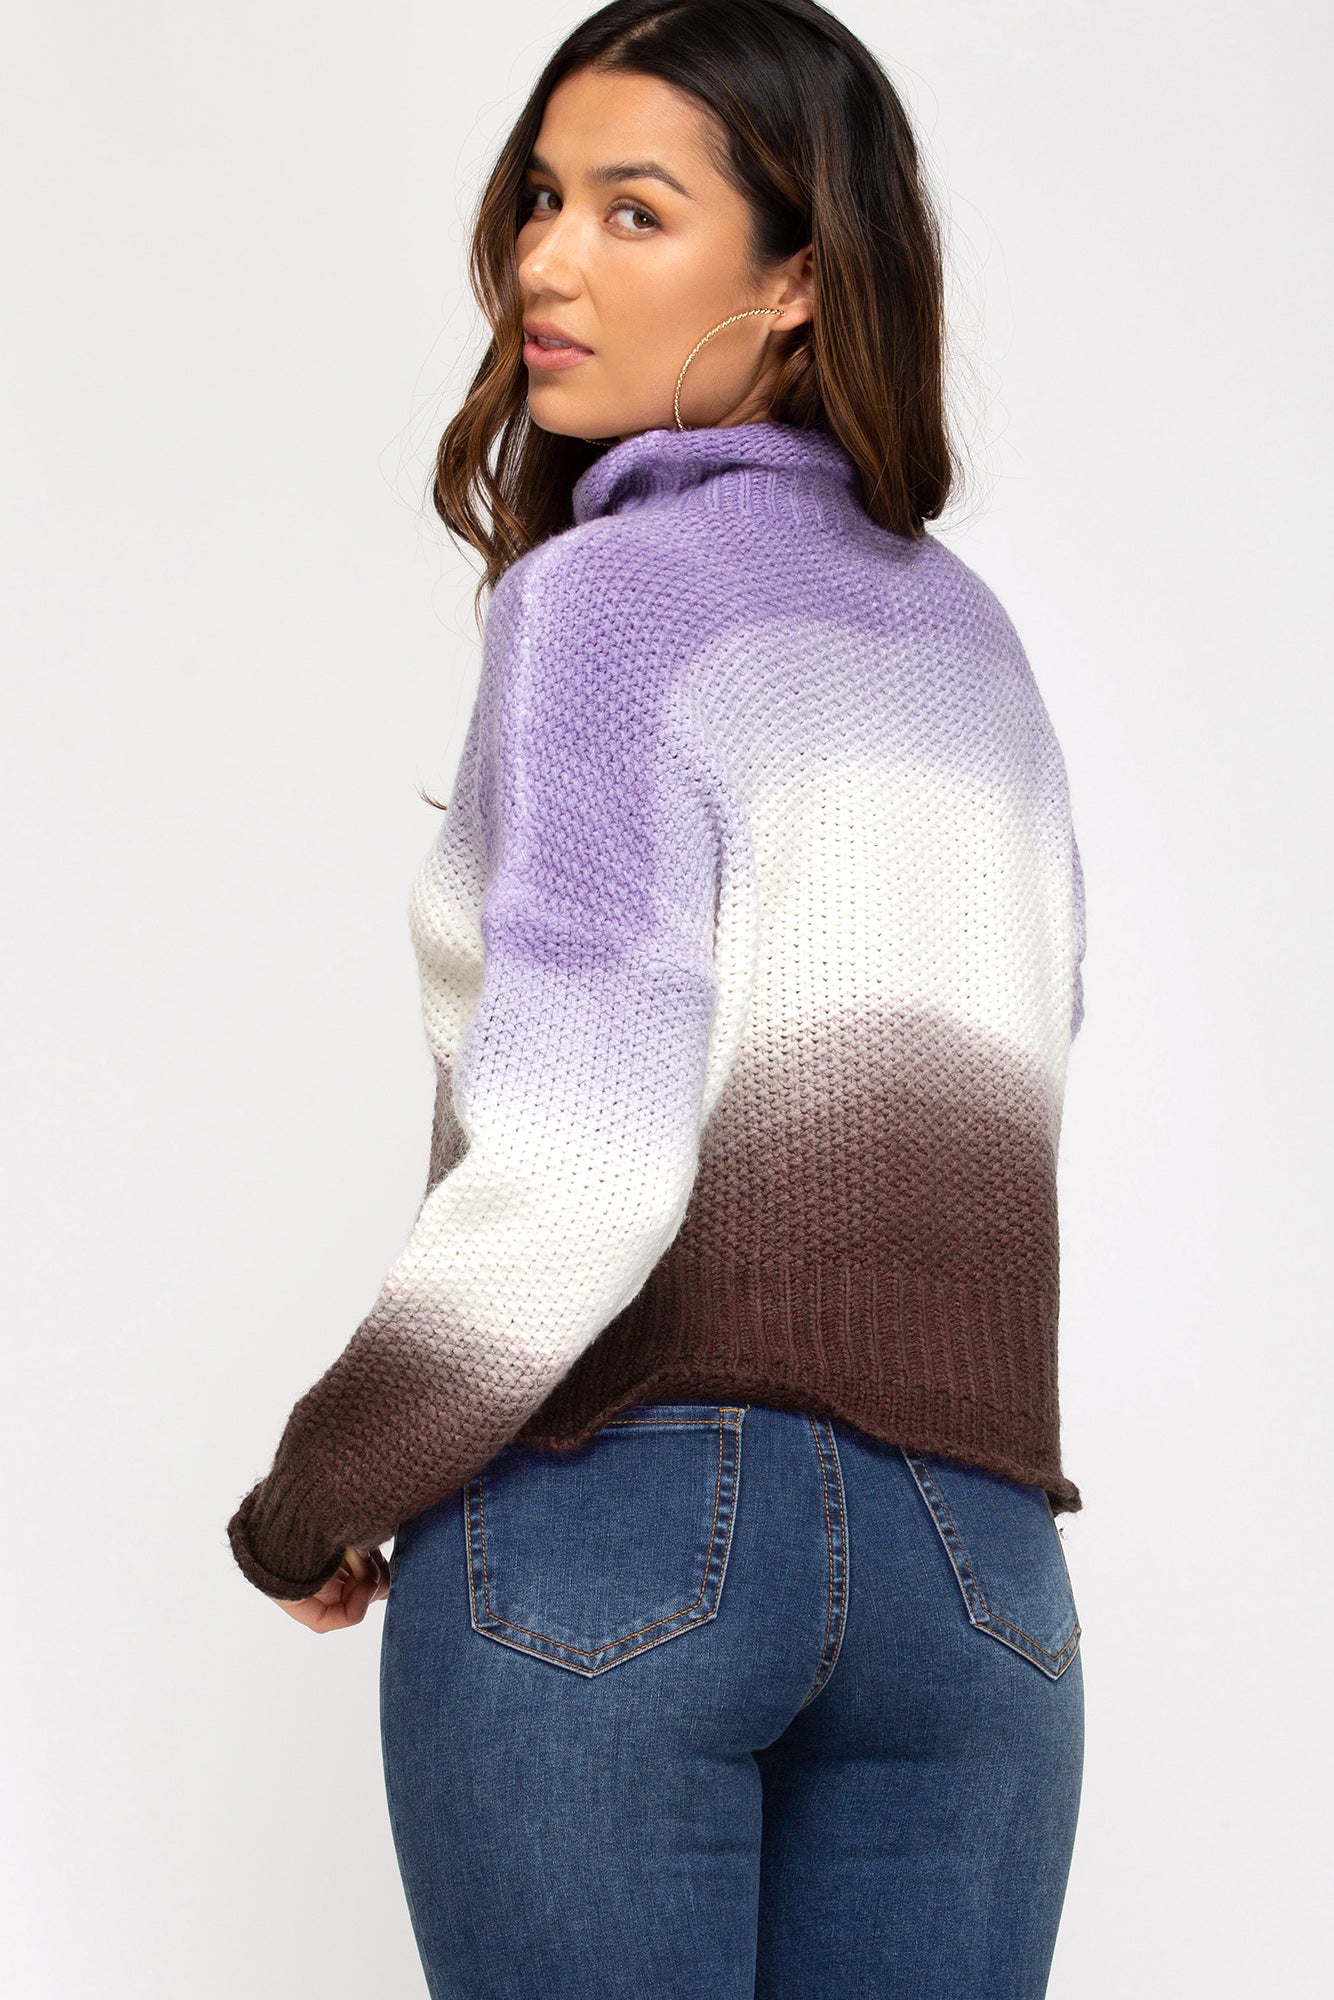 Dip Dyed Knit Sweater!